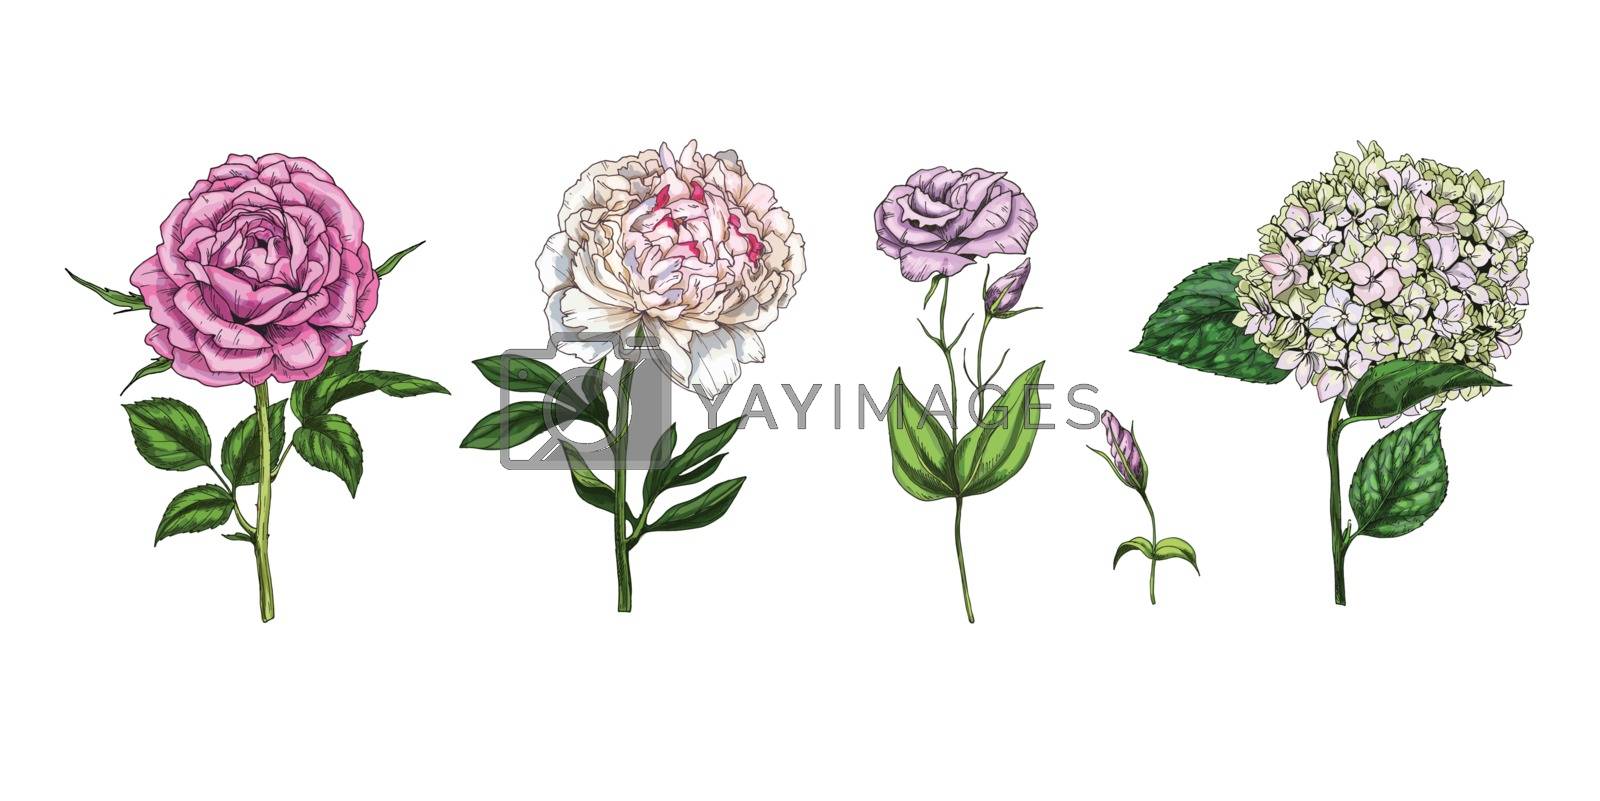 Royalty free image of Set of colorful blooming flowers and leaves isolated on white background. Rose, peony, phlox and eustoma. Botanical vector. Floral elements for your design. by nutela_pancake